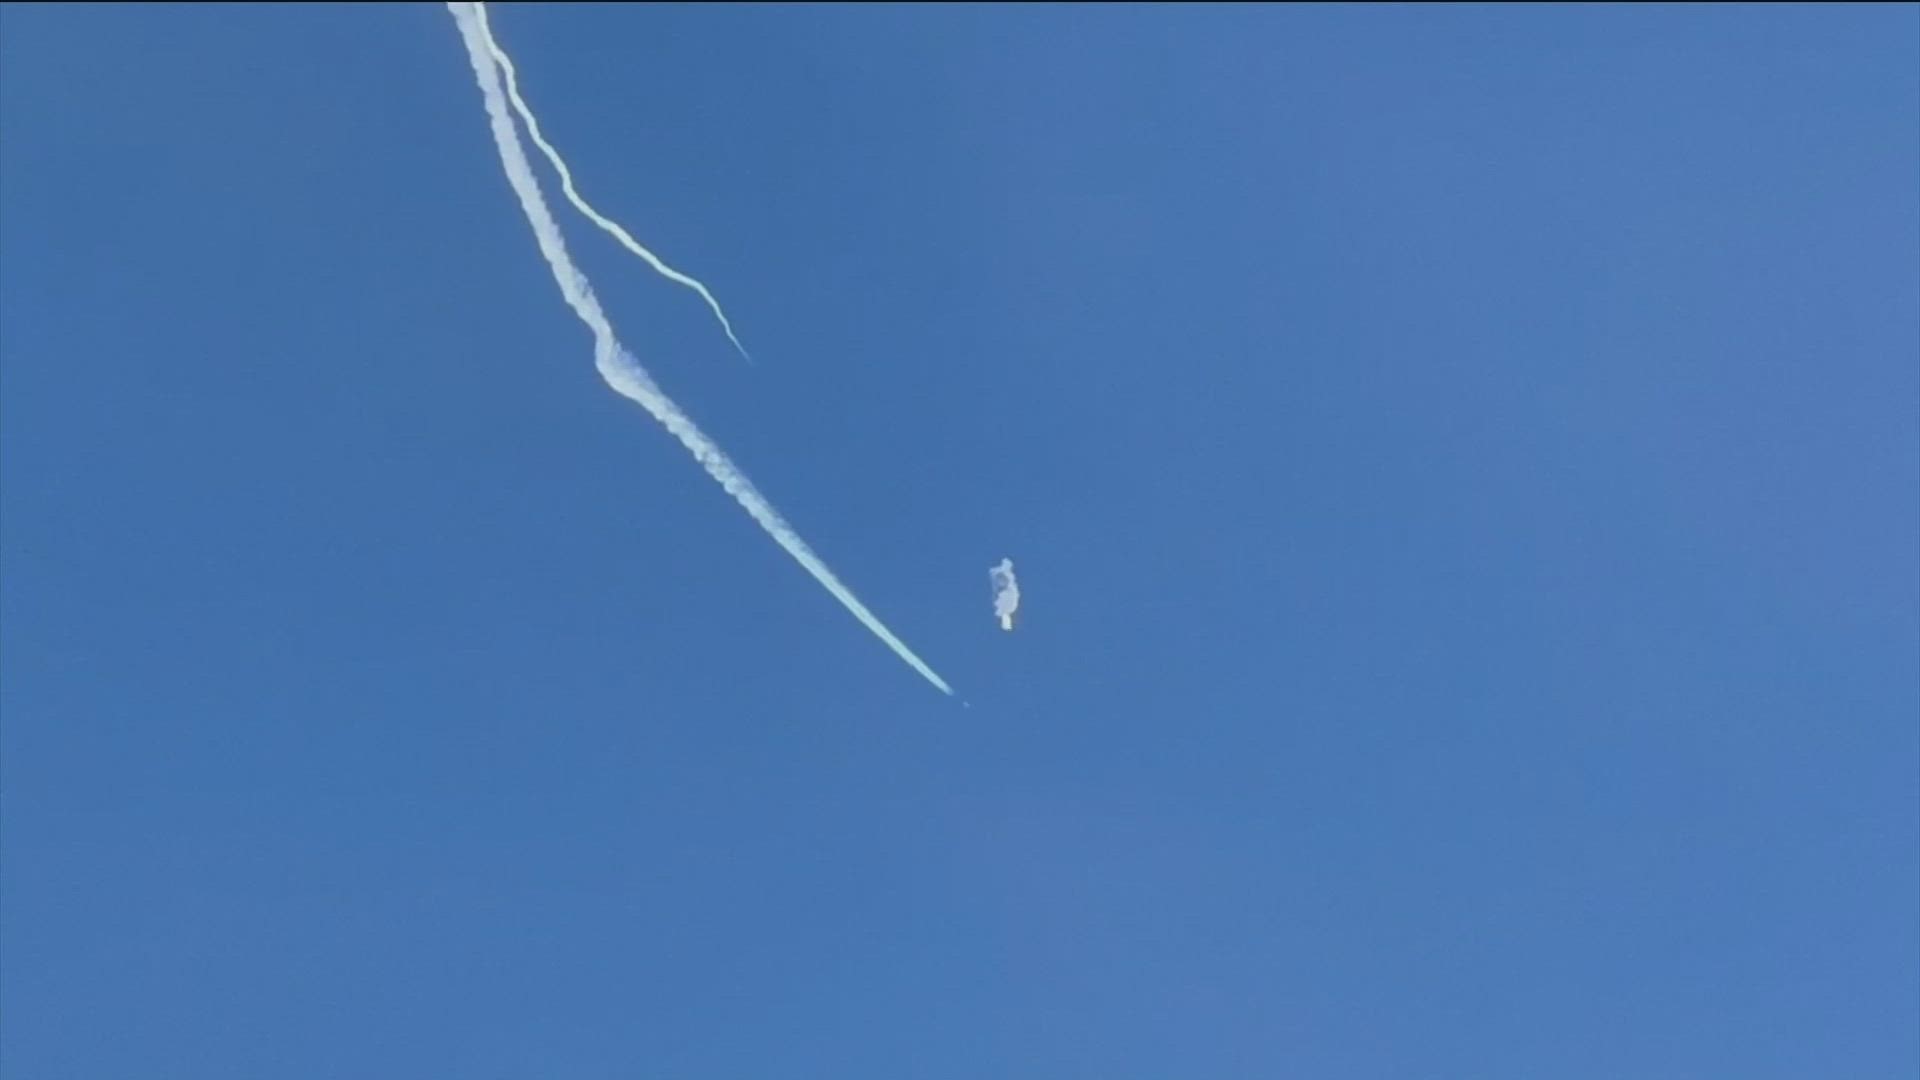 Television footage showed a small explosion, followed by the balloon descending toward the water.